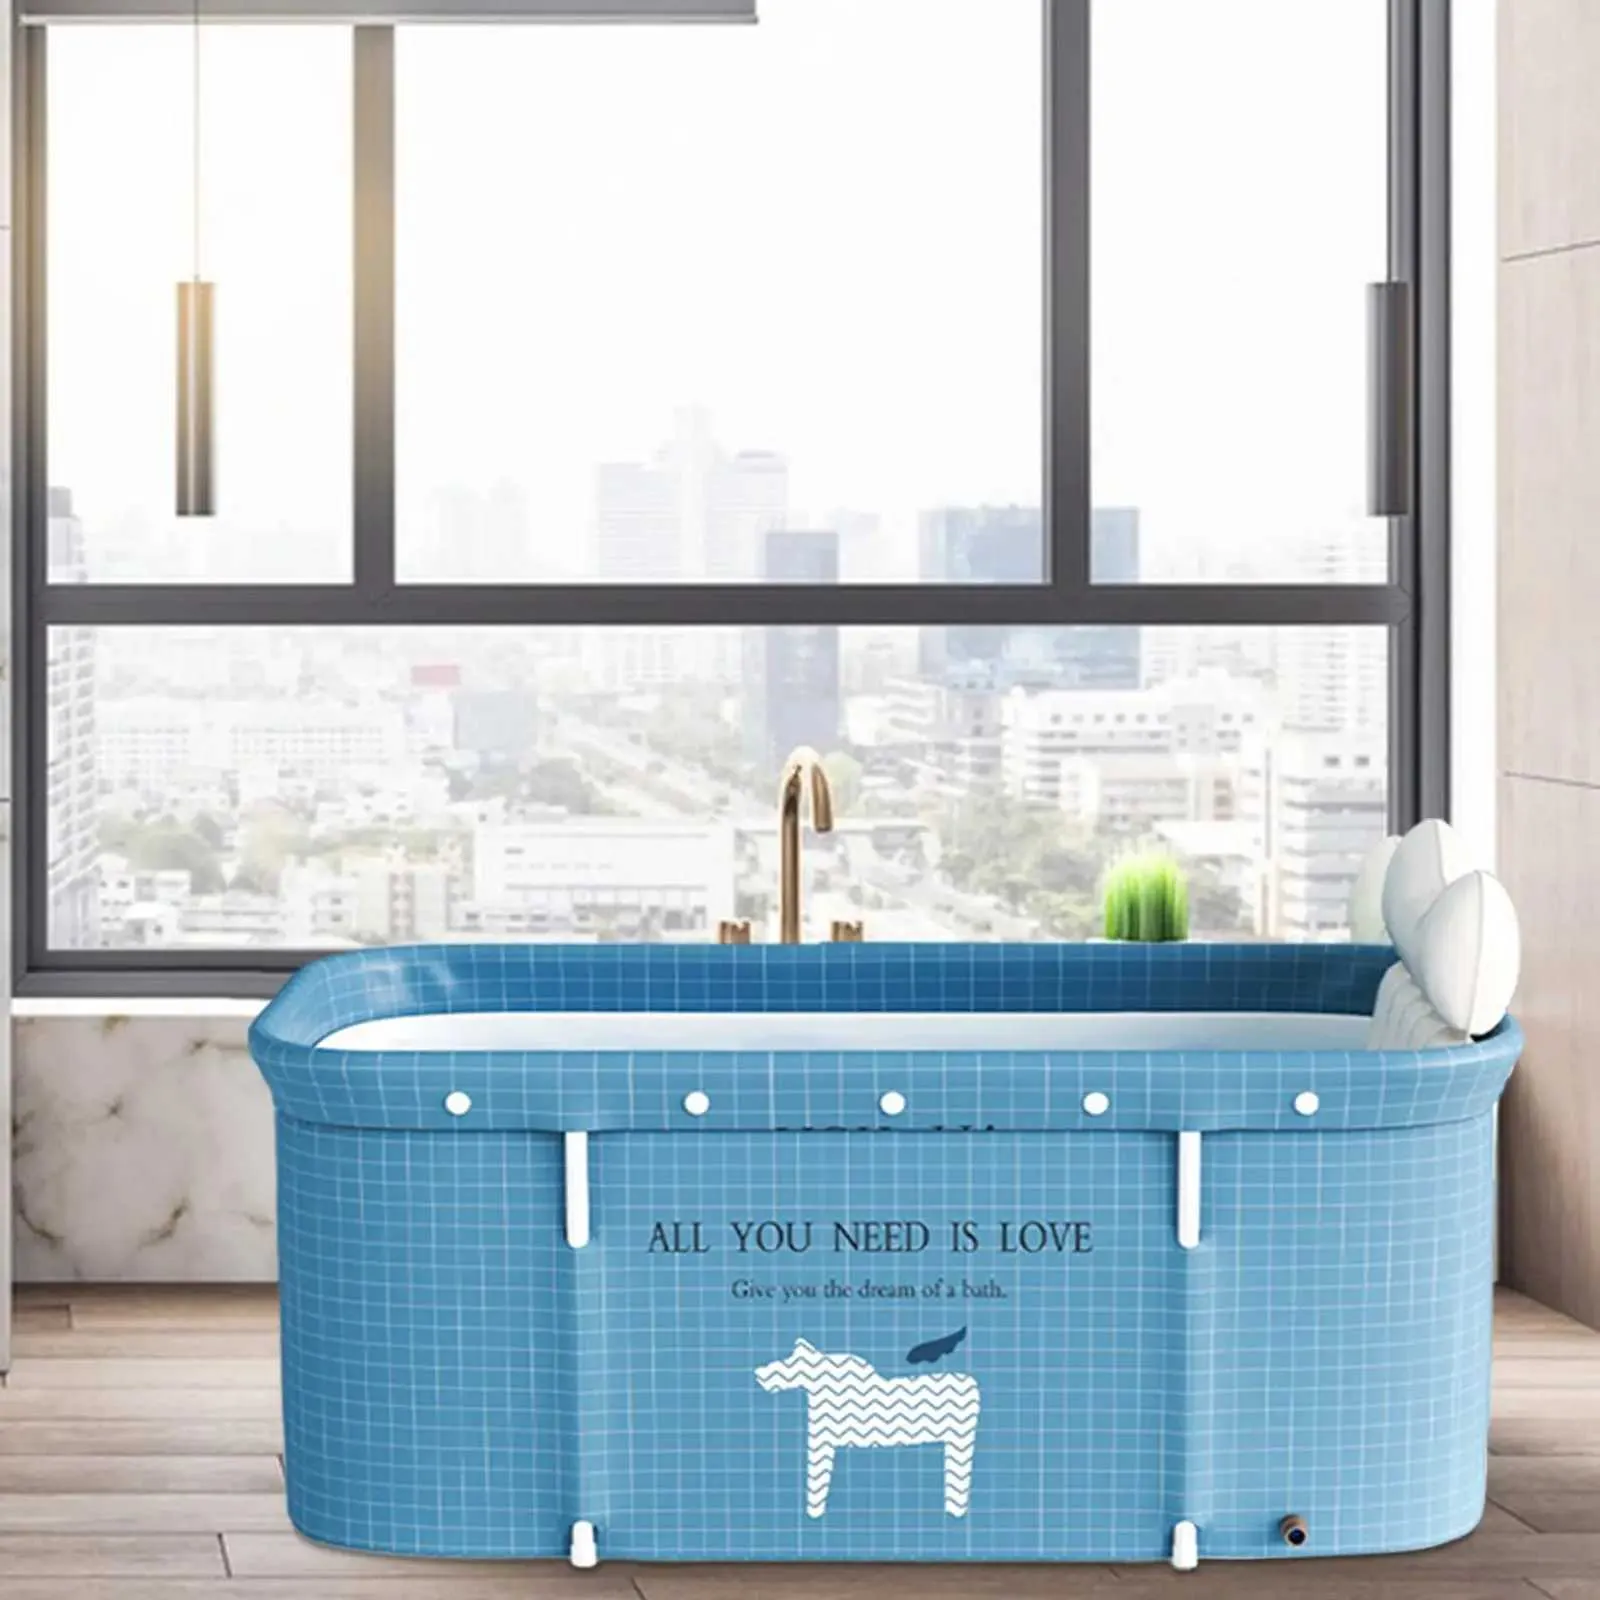 Bathroom Tub Large Sturdy Portable Kids Swimming Pool Soaking Standing Bath Tub for SPA Outdoor Indoor Shower Stall Family Small